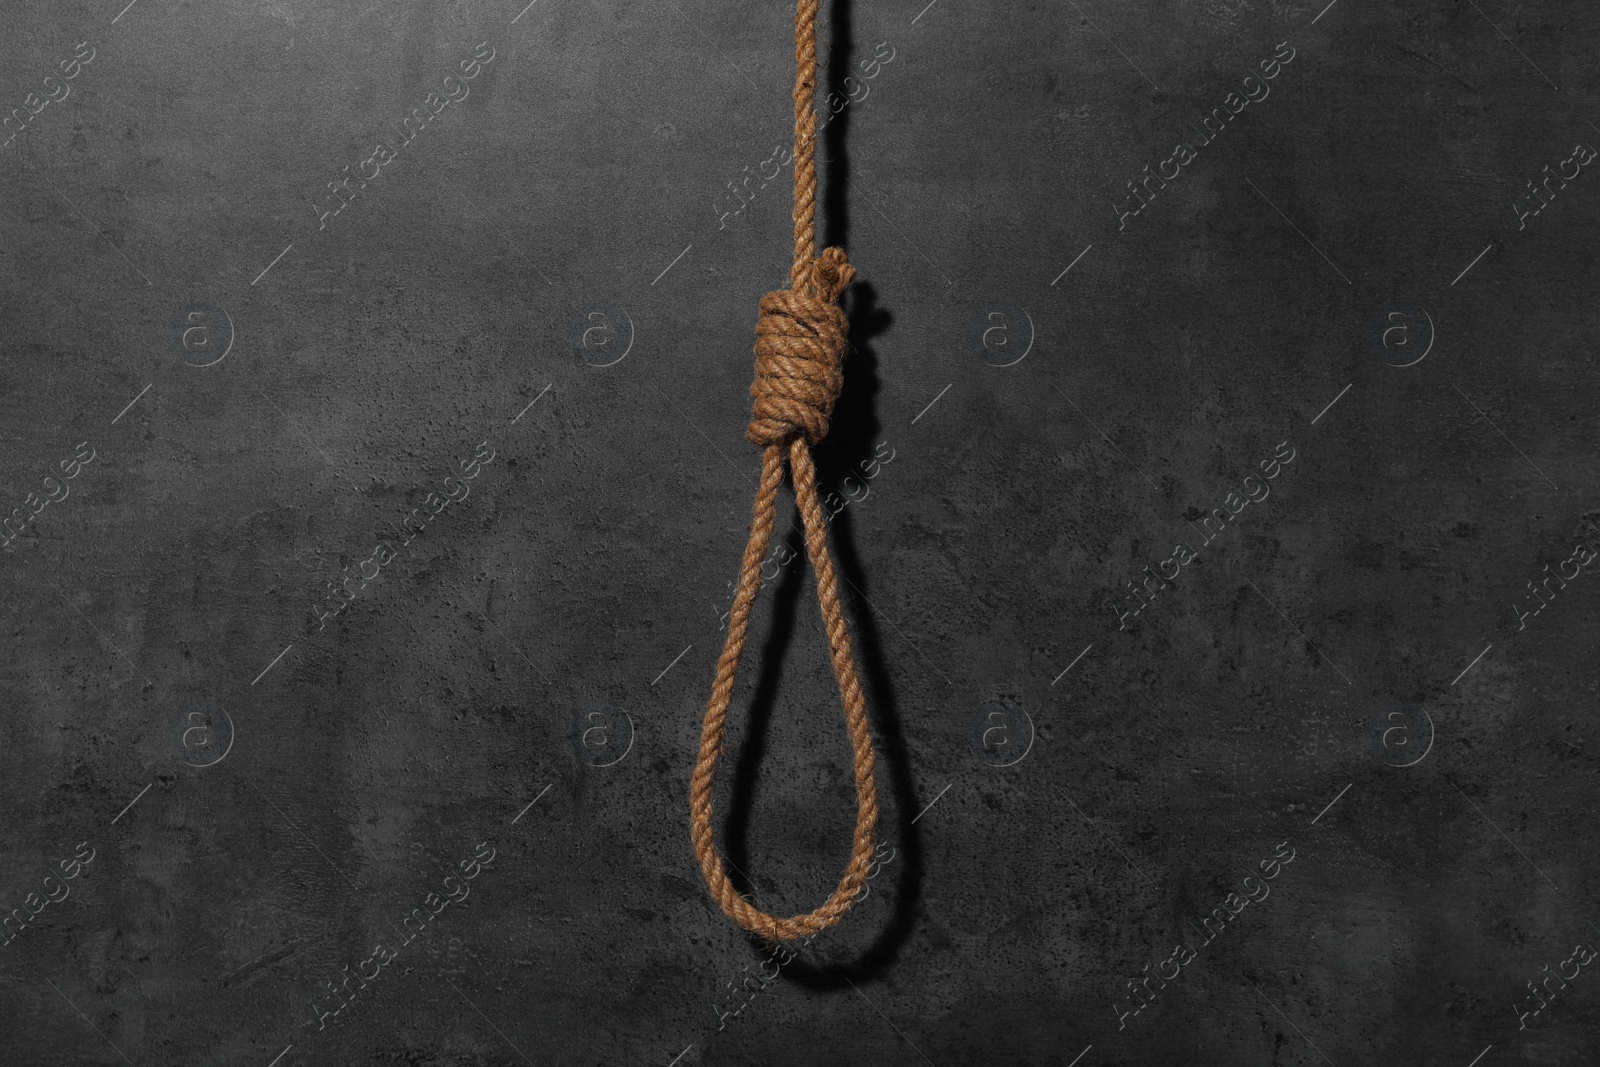 Photo of Tied rope noose against grey stone background